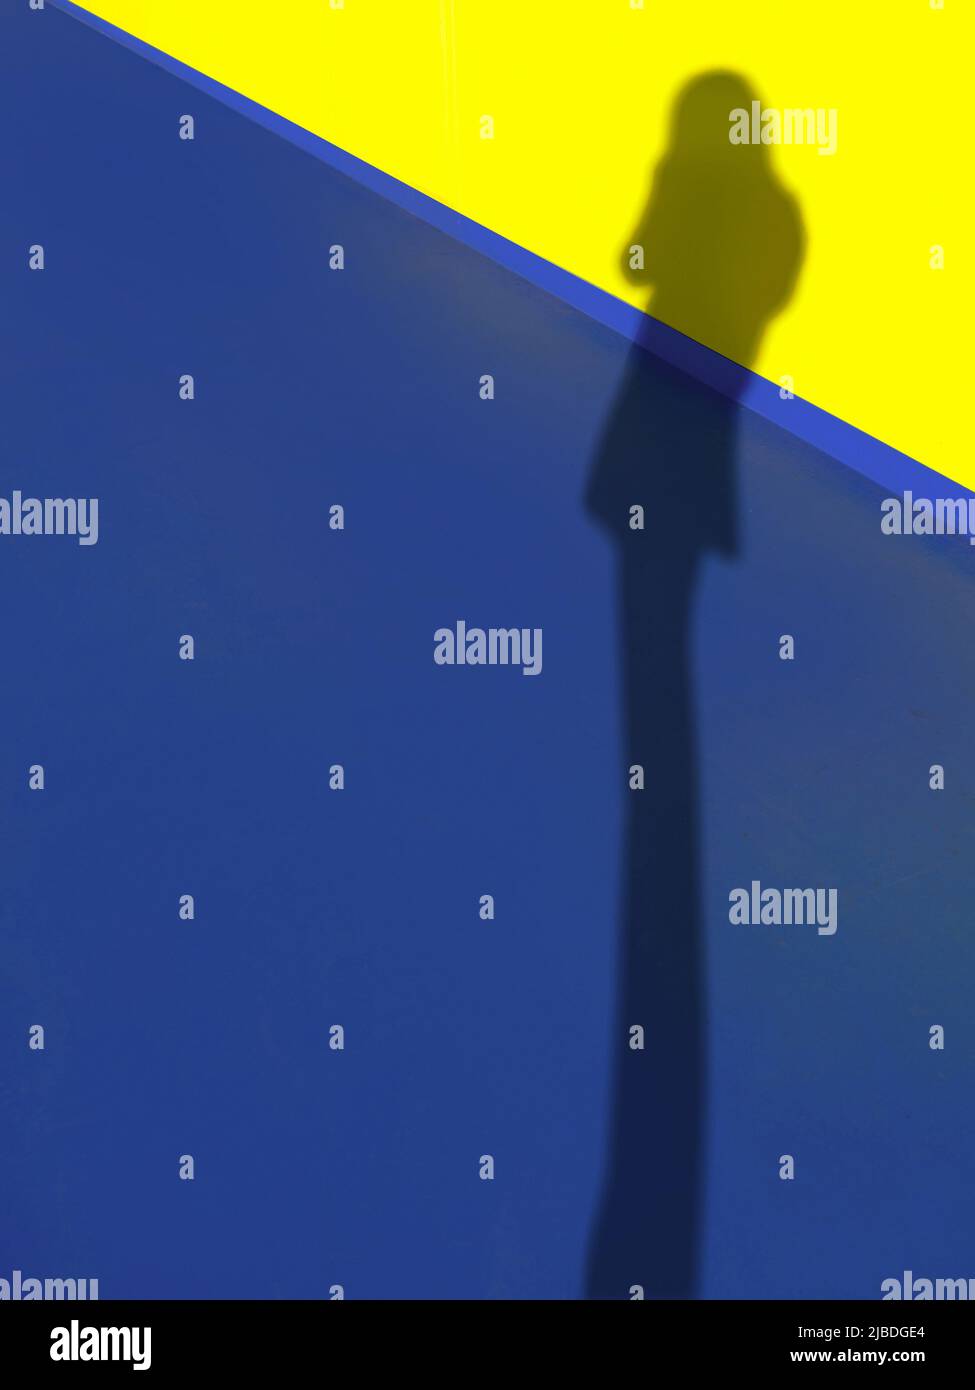 Defocus Long legs shadow of a standing woman on the vibrant blue color flooring and yellow wall, summer bright with copy space, abstract arts Stock Photo